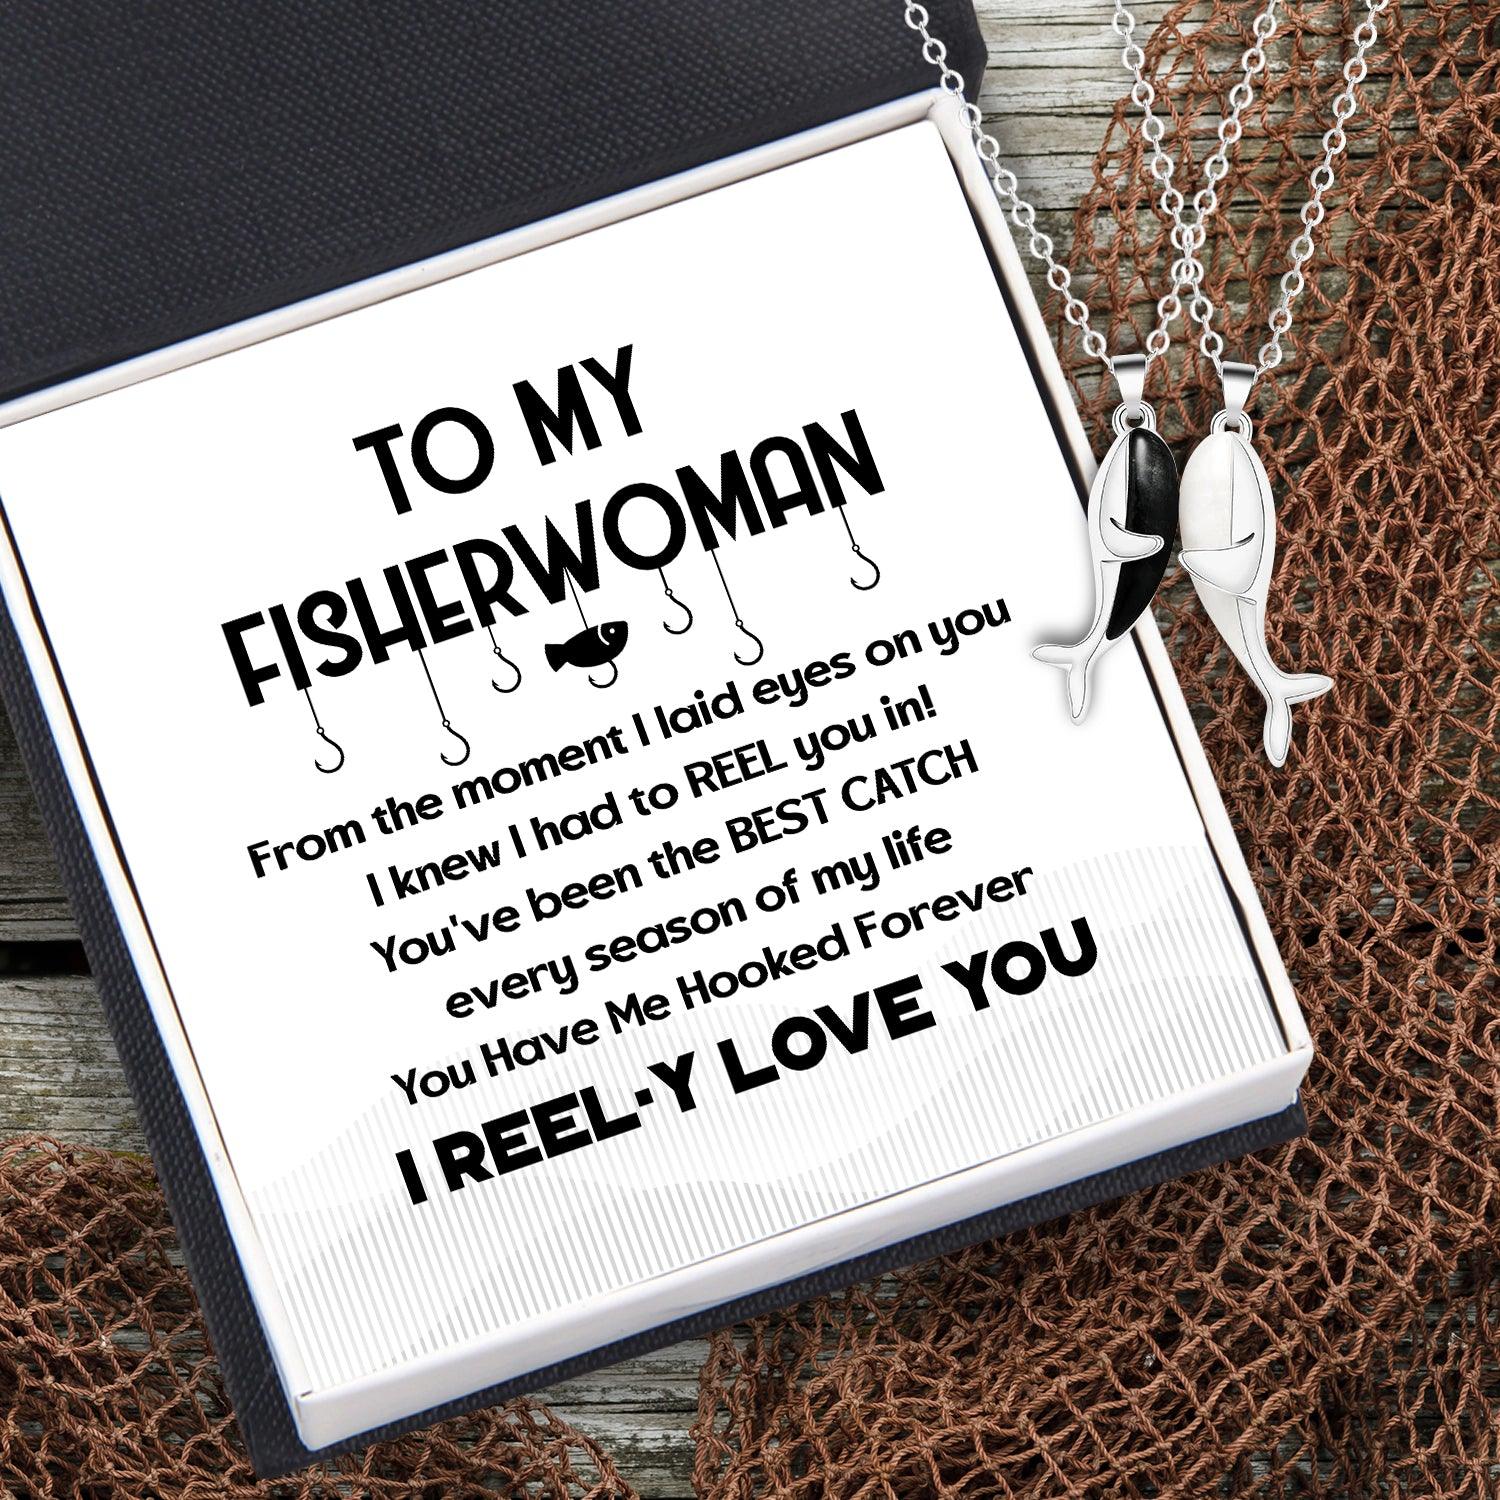 Whale Hug Couple Necklace - Fishing - To My Fisherwoman - I Reel-y Love You - Augngd13001 - Gifts Holder